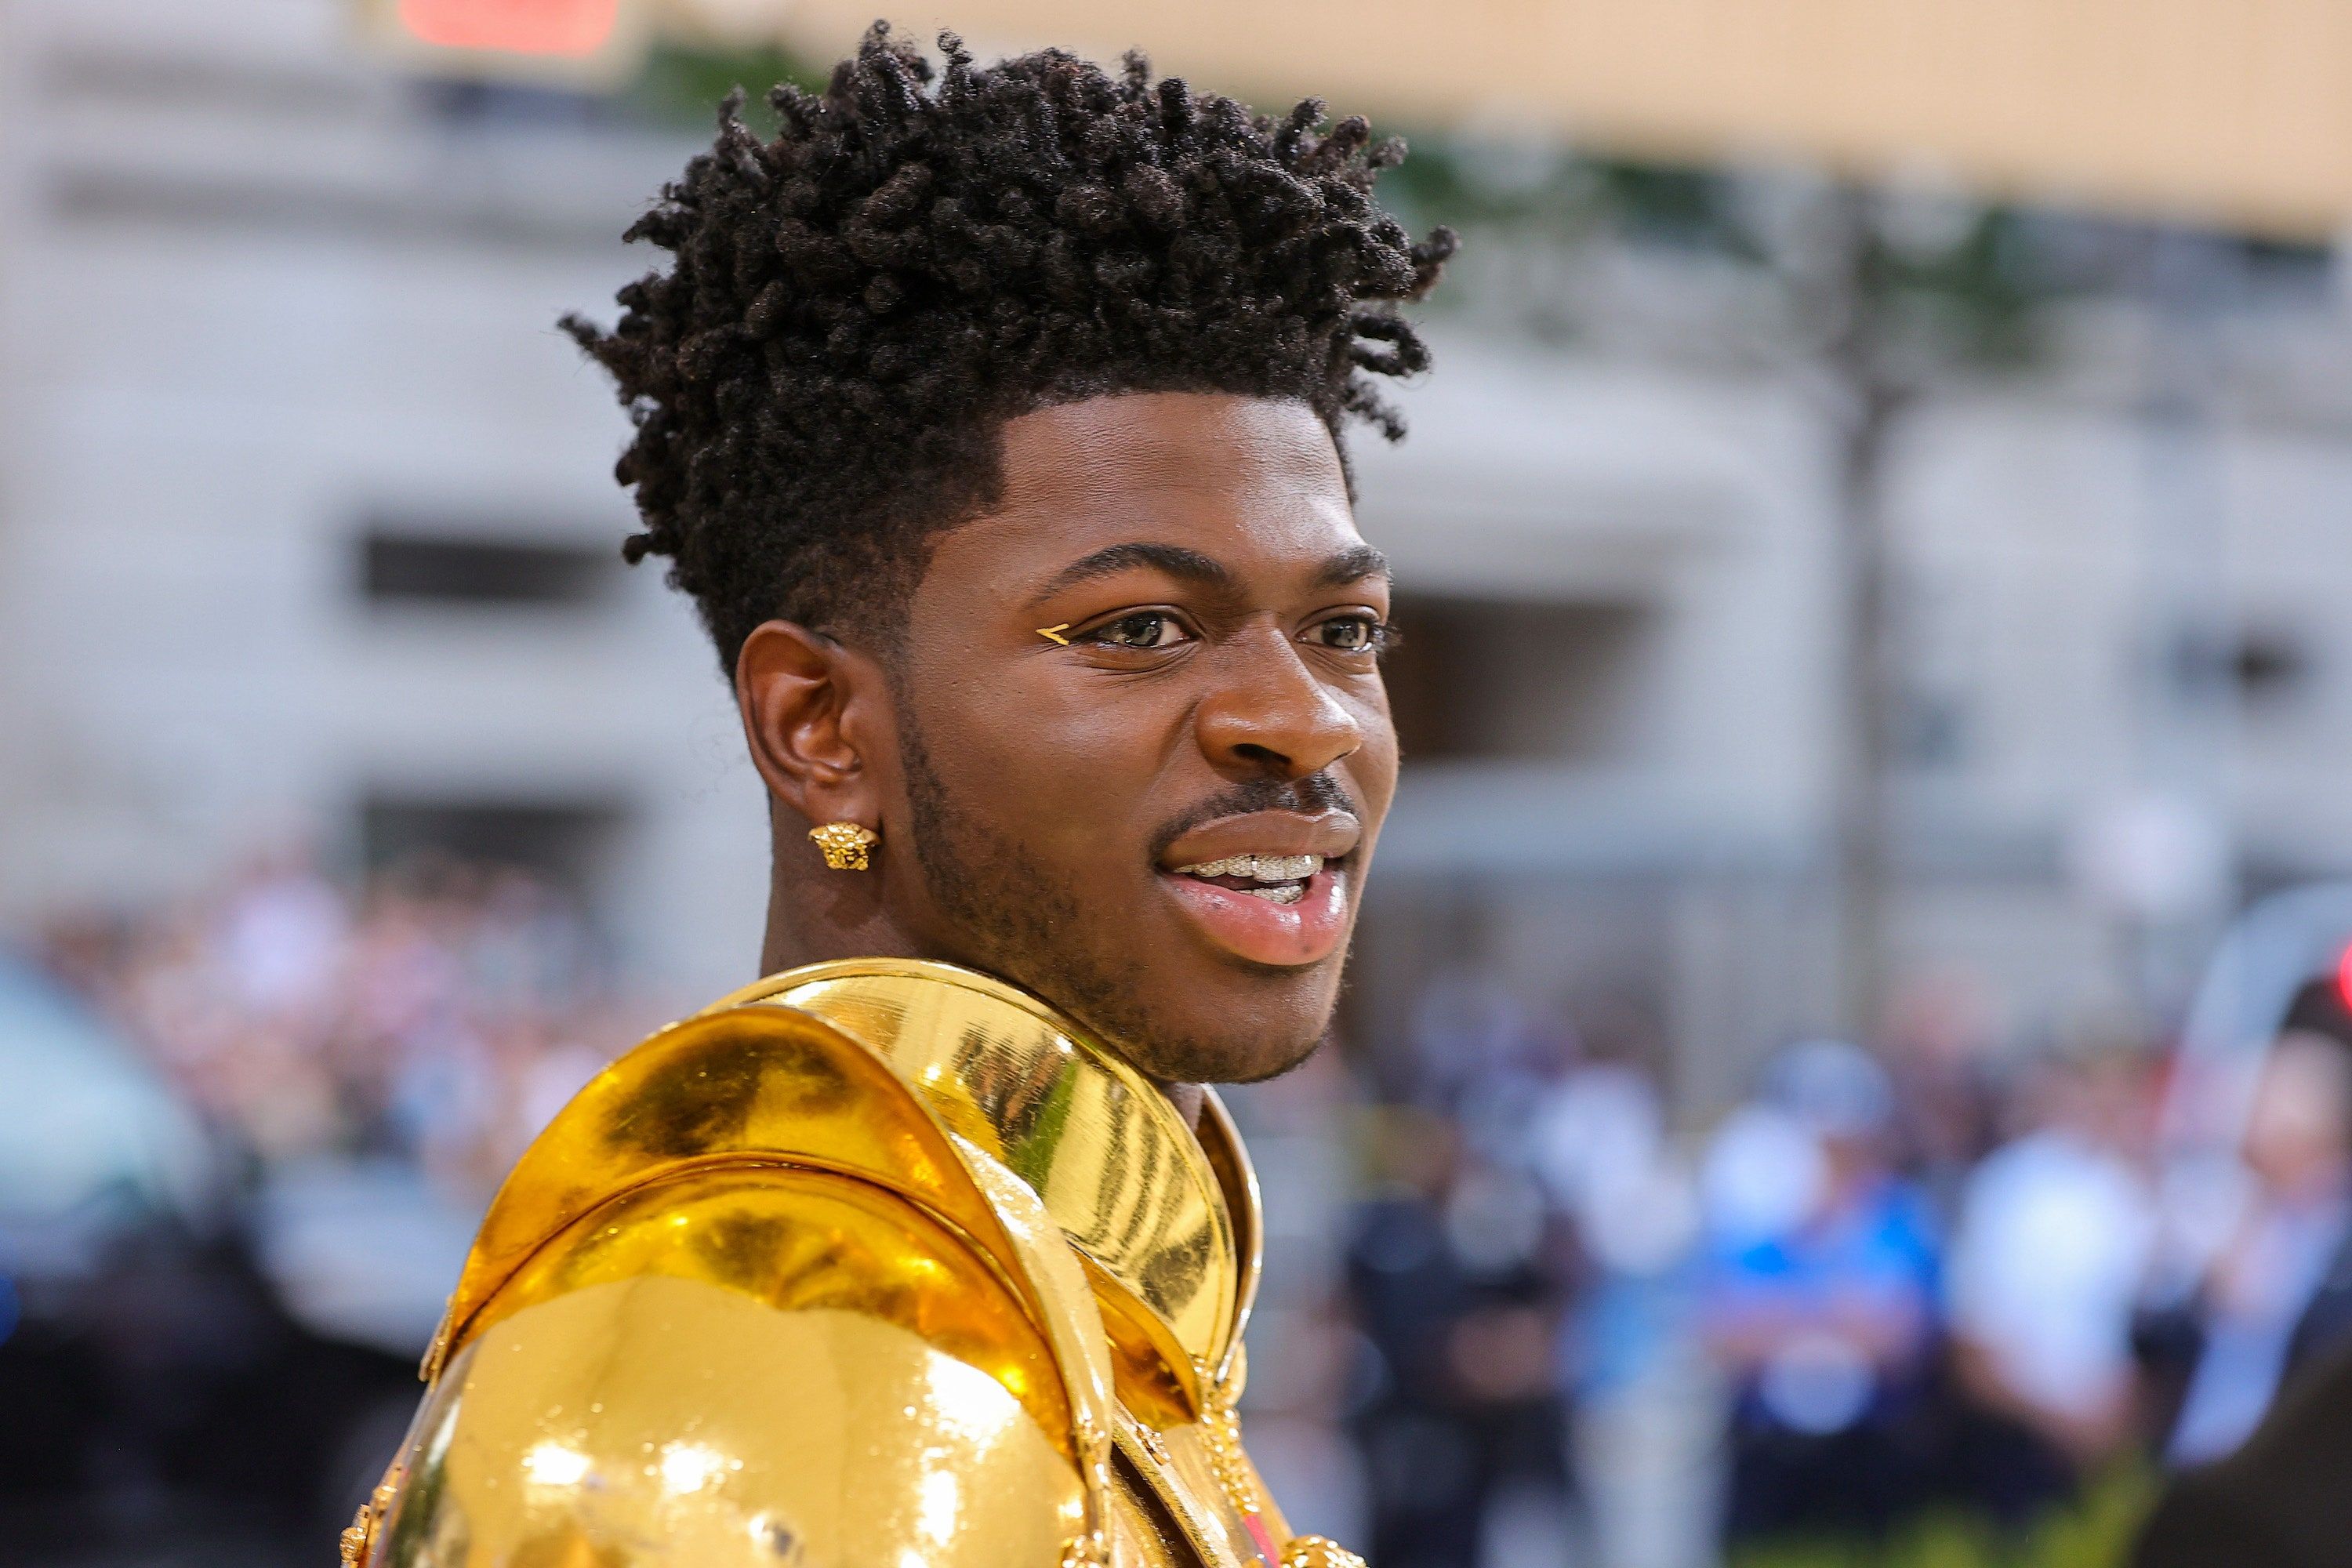 LIL NAS X PLEADS GUILTY ON 12 CHARGES